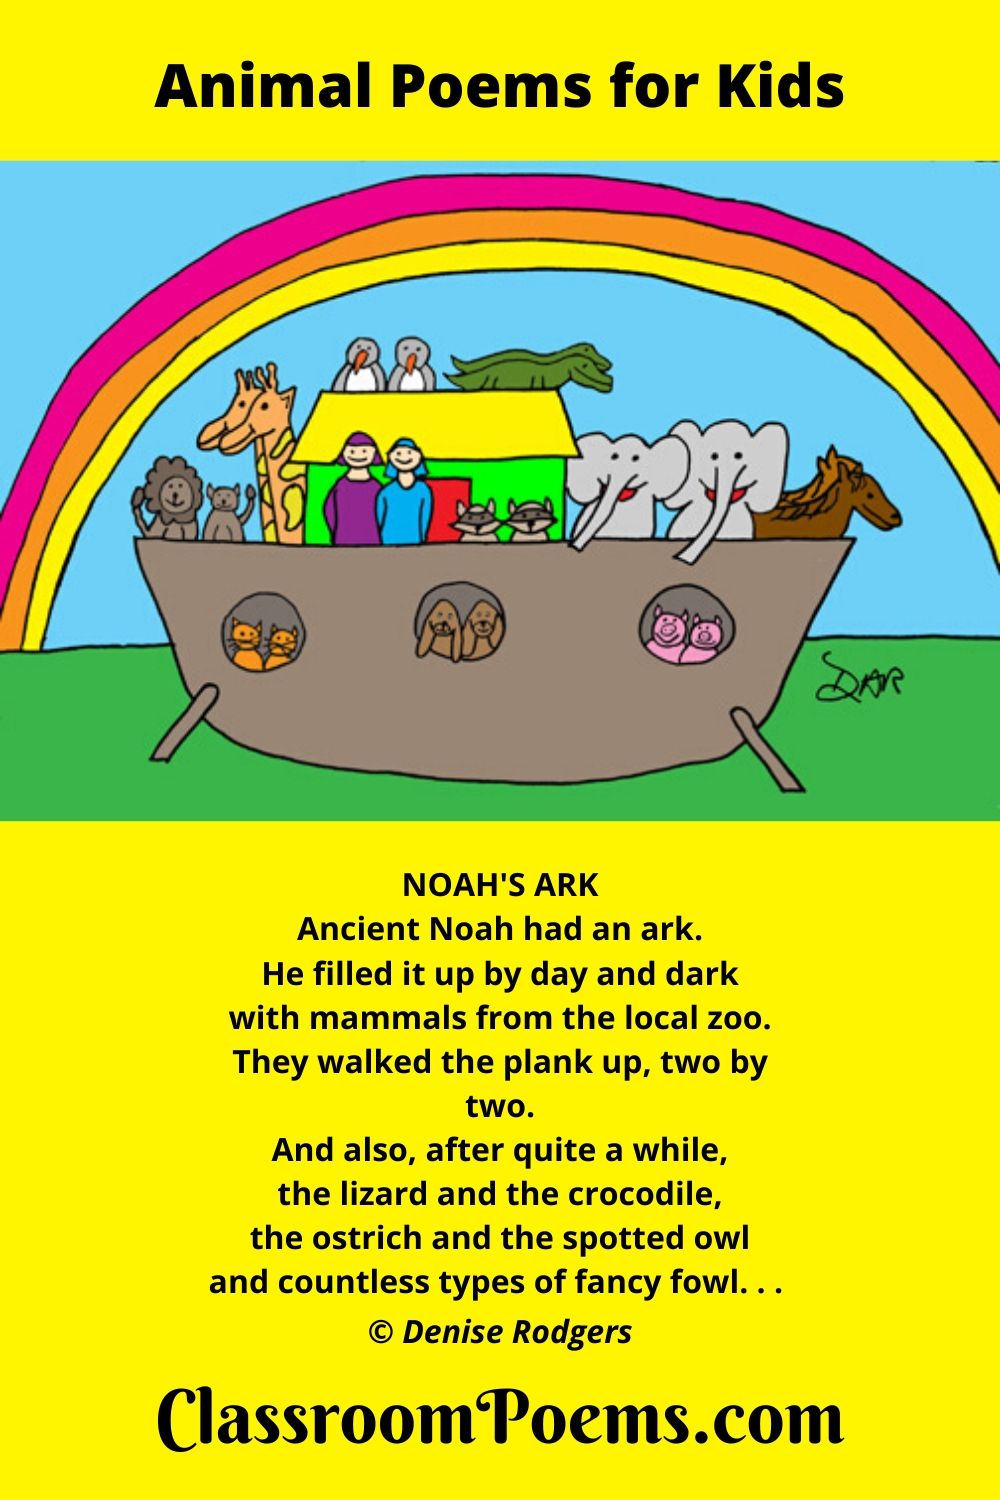 Noah's Ark drawing and poem by Denise Rodgers on Classroompoems.com.